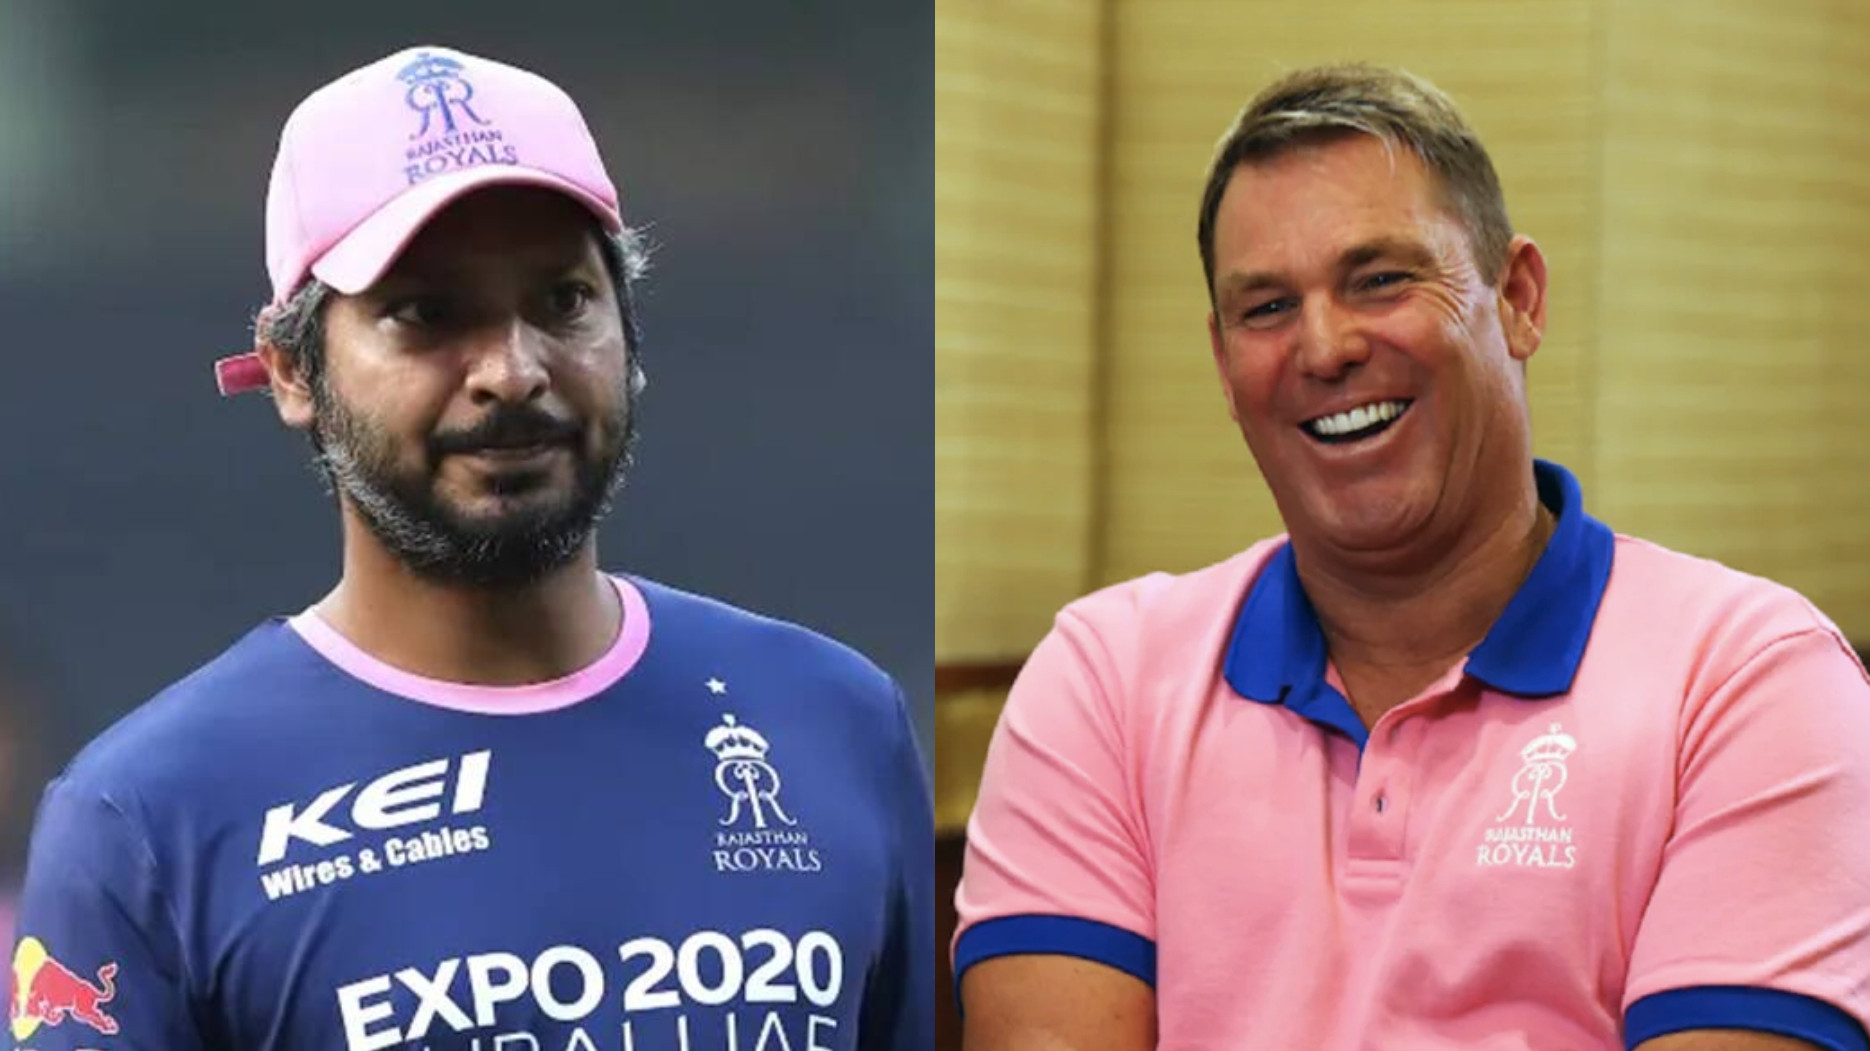 WATCH- 'He was larger than life, unique, authentic'- RR's Kumar Sangakkara pays touching tribute to Shane Warne 